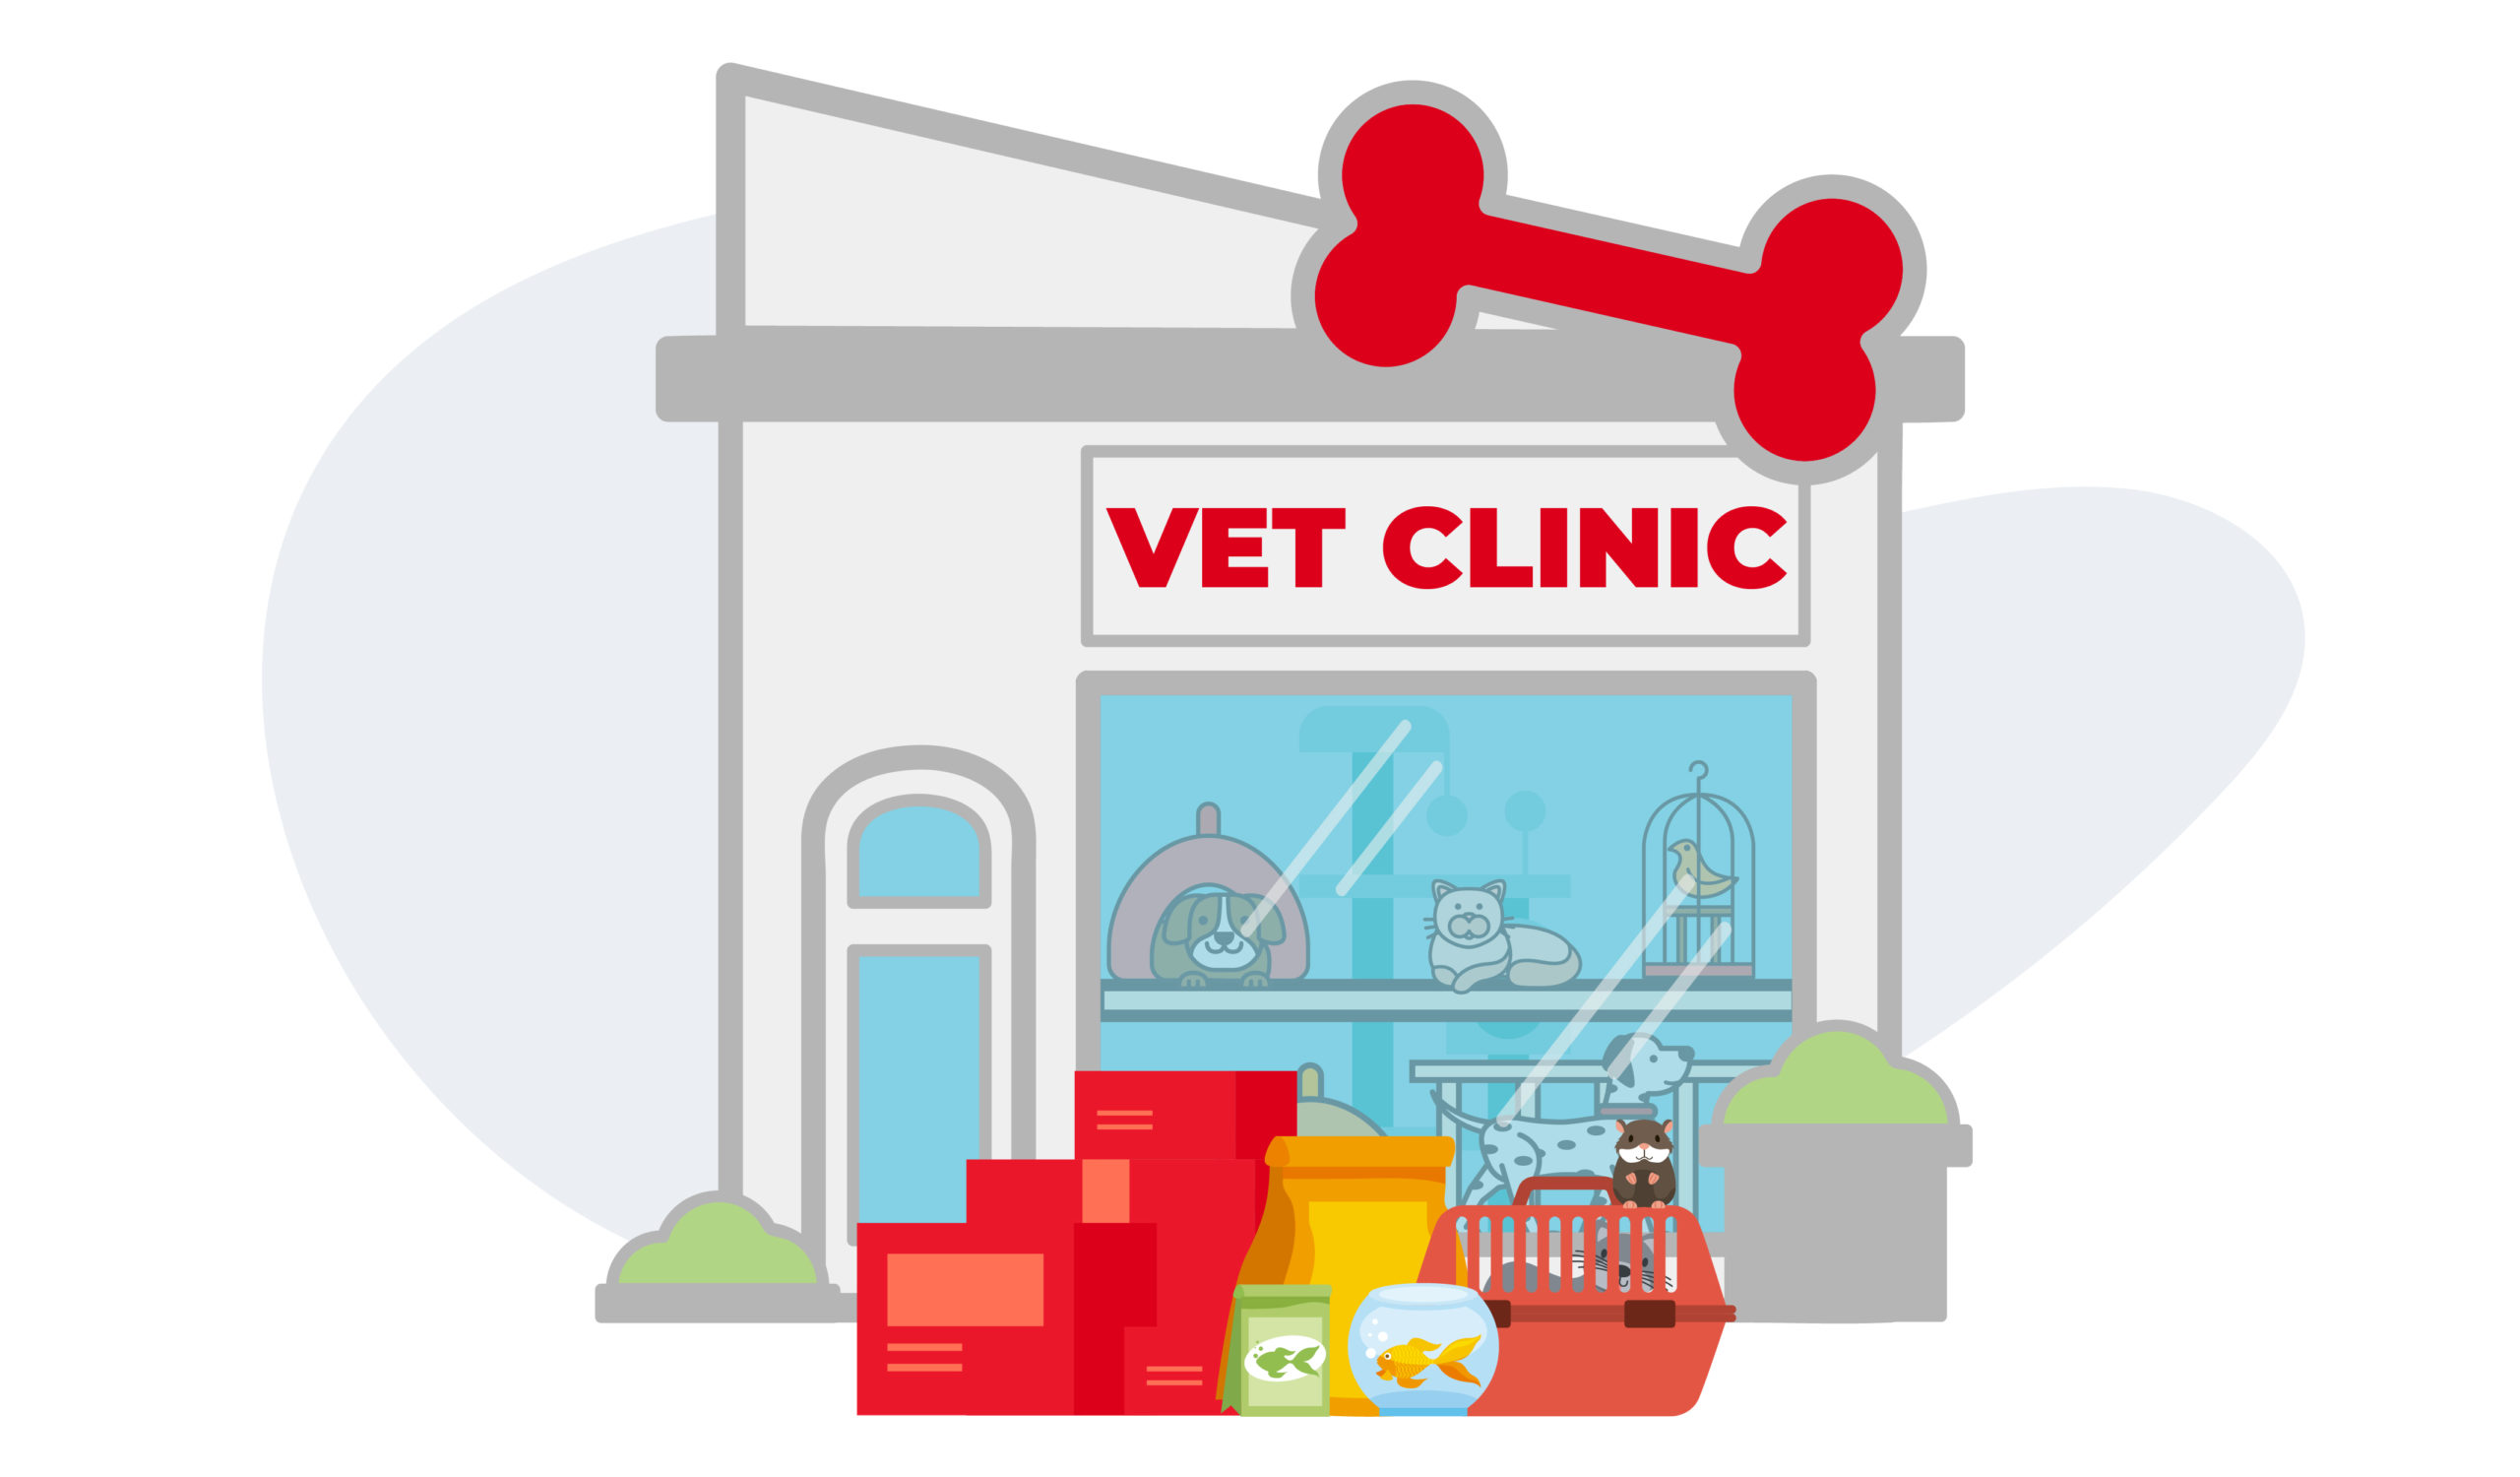 A vet clinic taking in a shipment of pet supplies, food, and medicine.